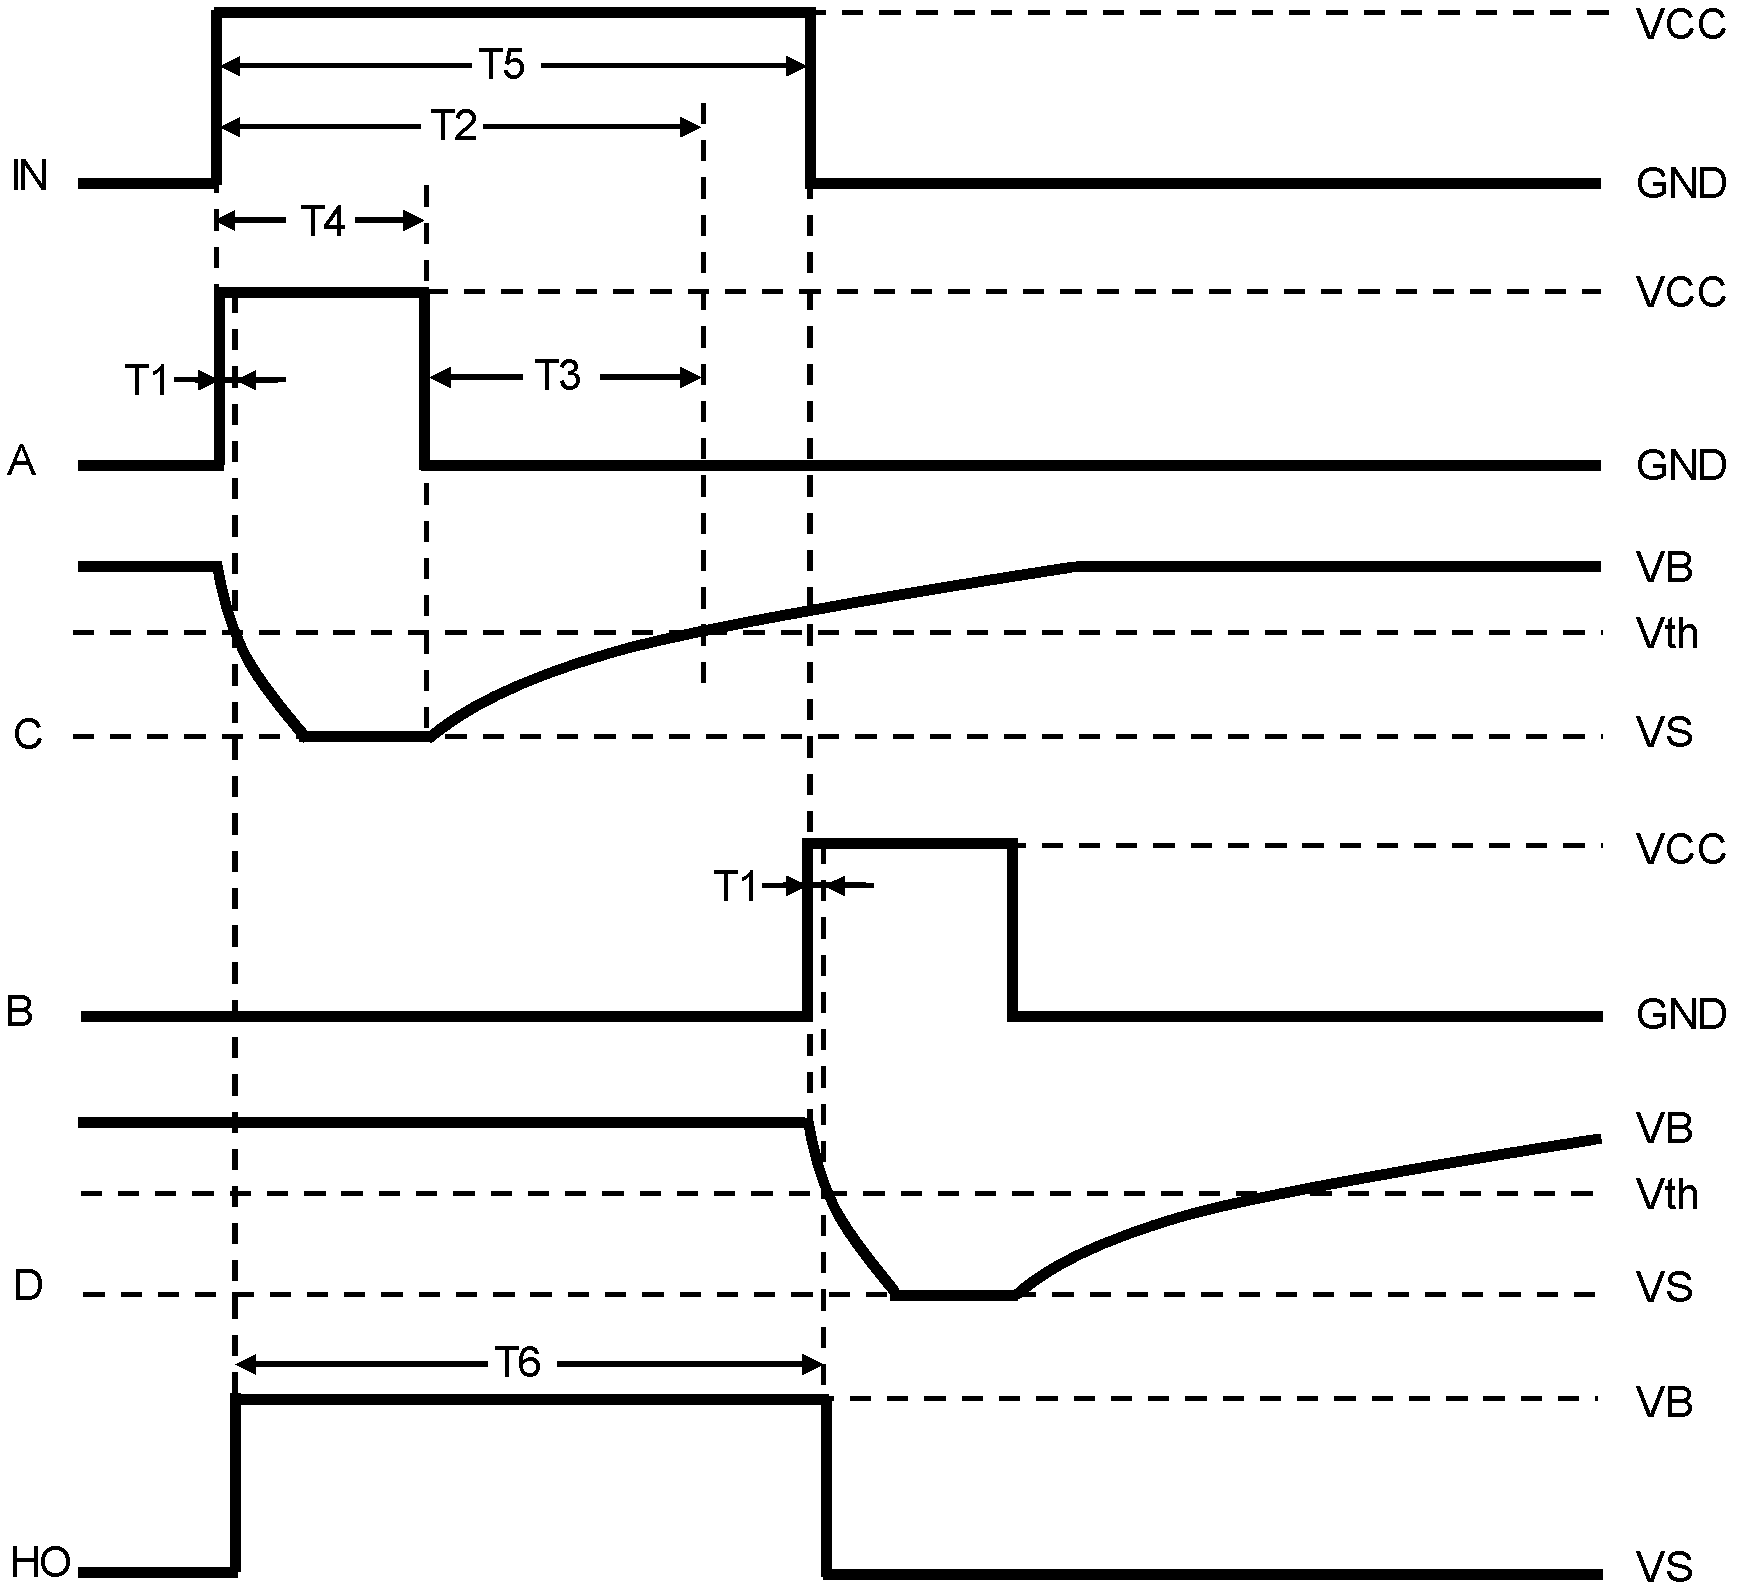 Level switching circuit for high-voltage integrated circuit